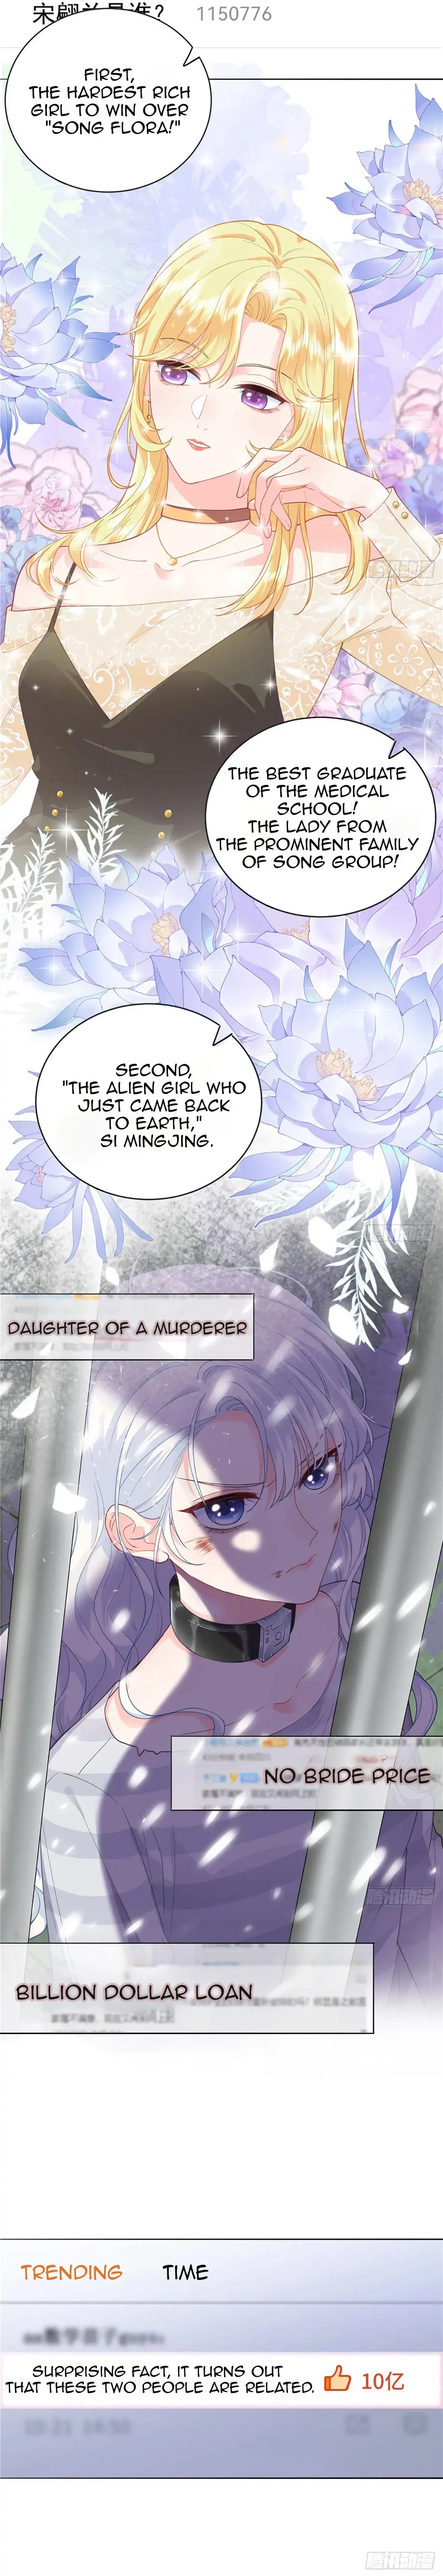 THE Son of a Dragon! Mommy is a criminal Chapter 1 - Page 3